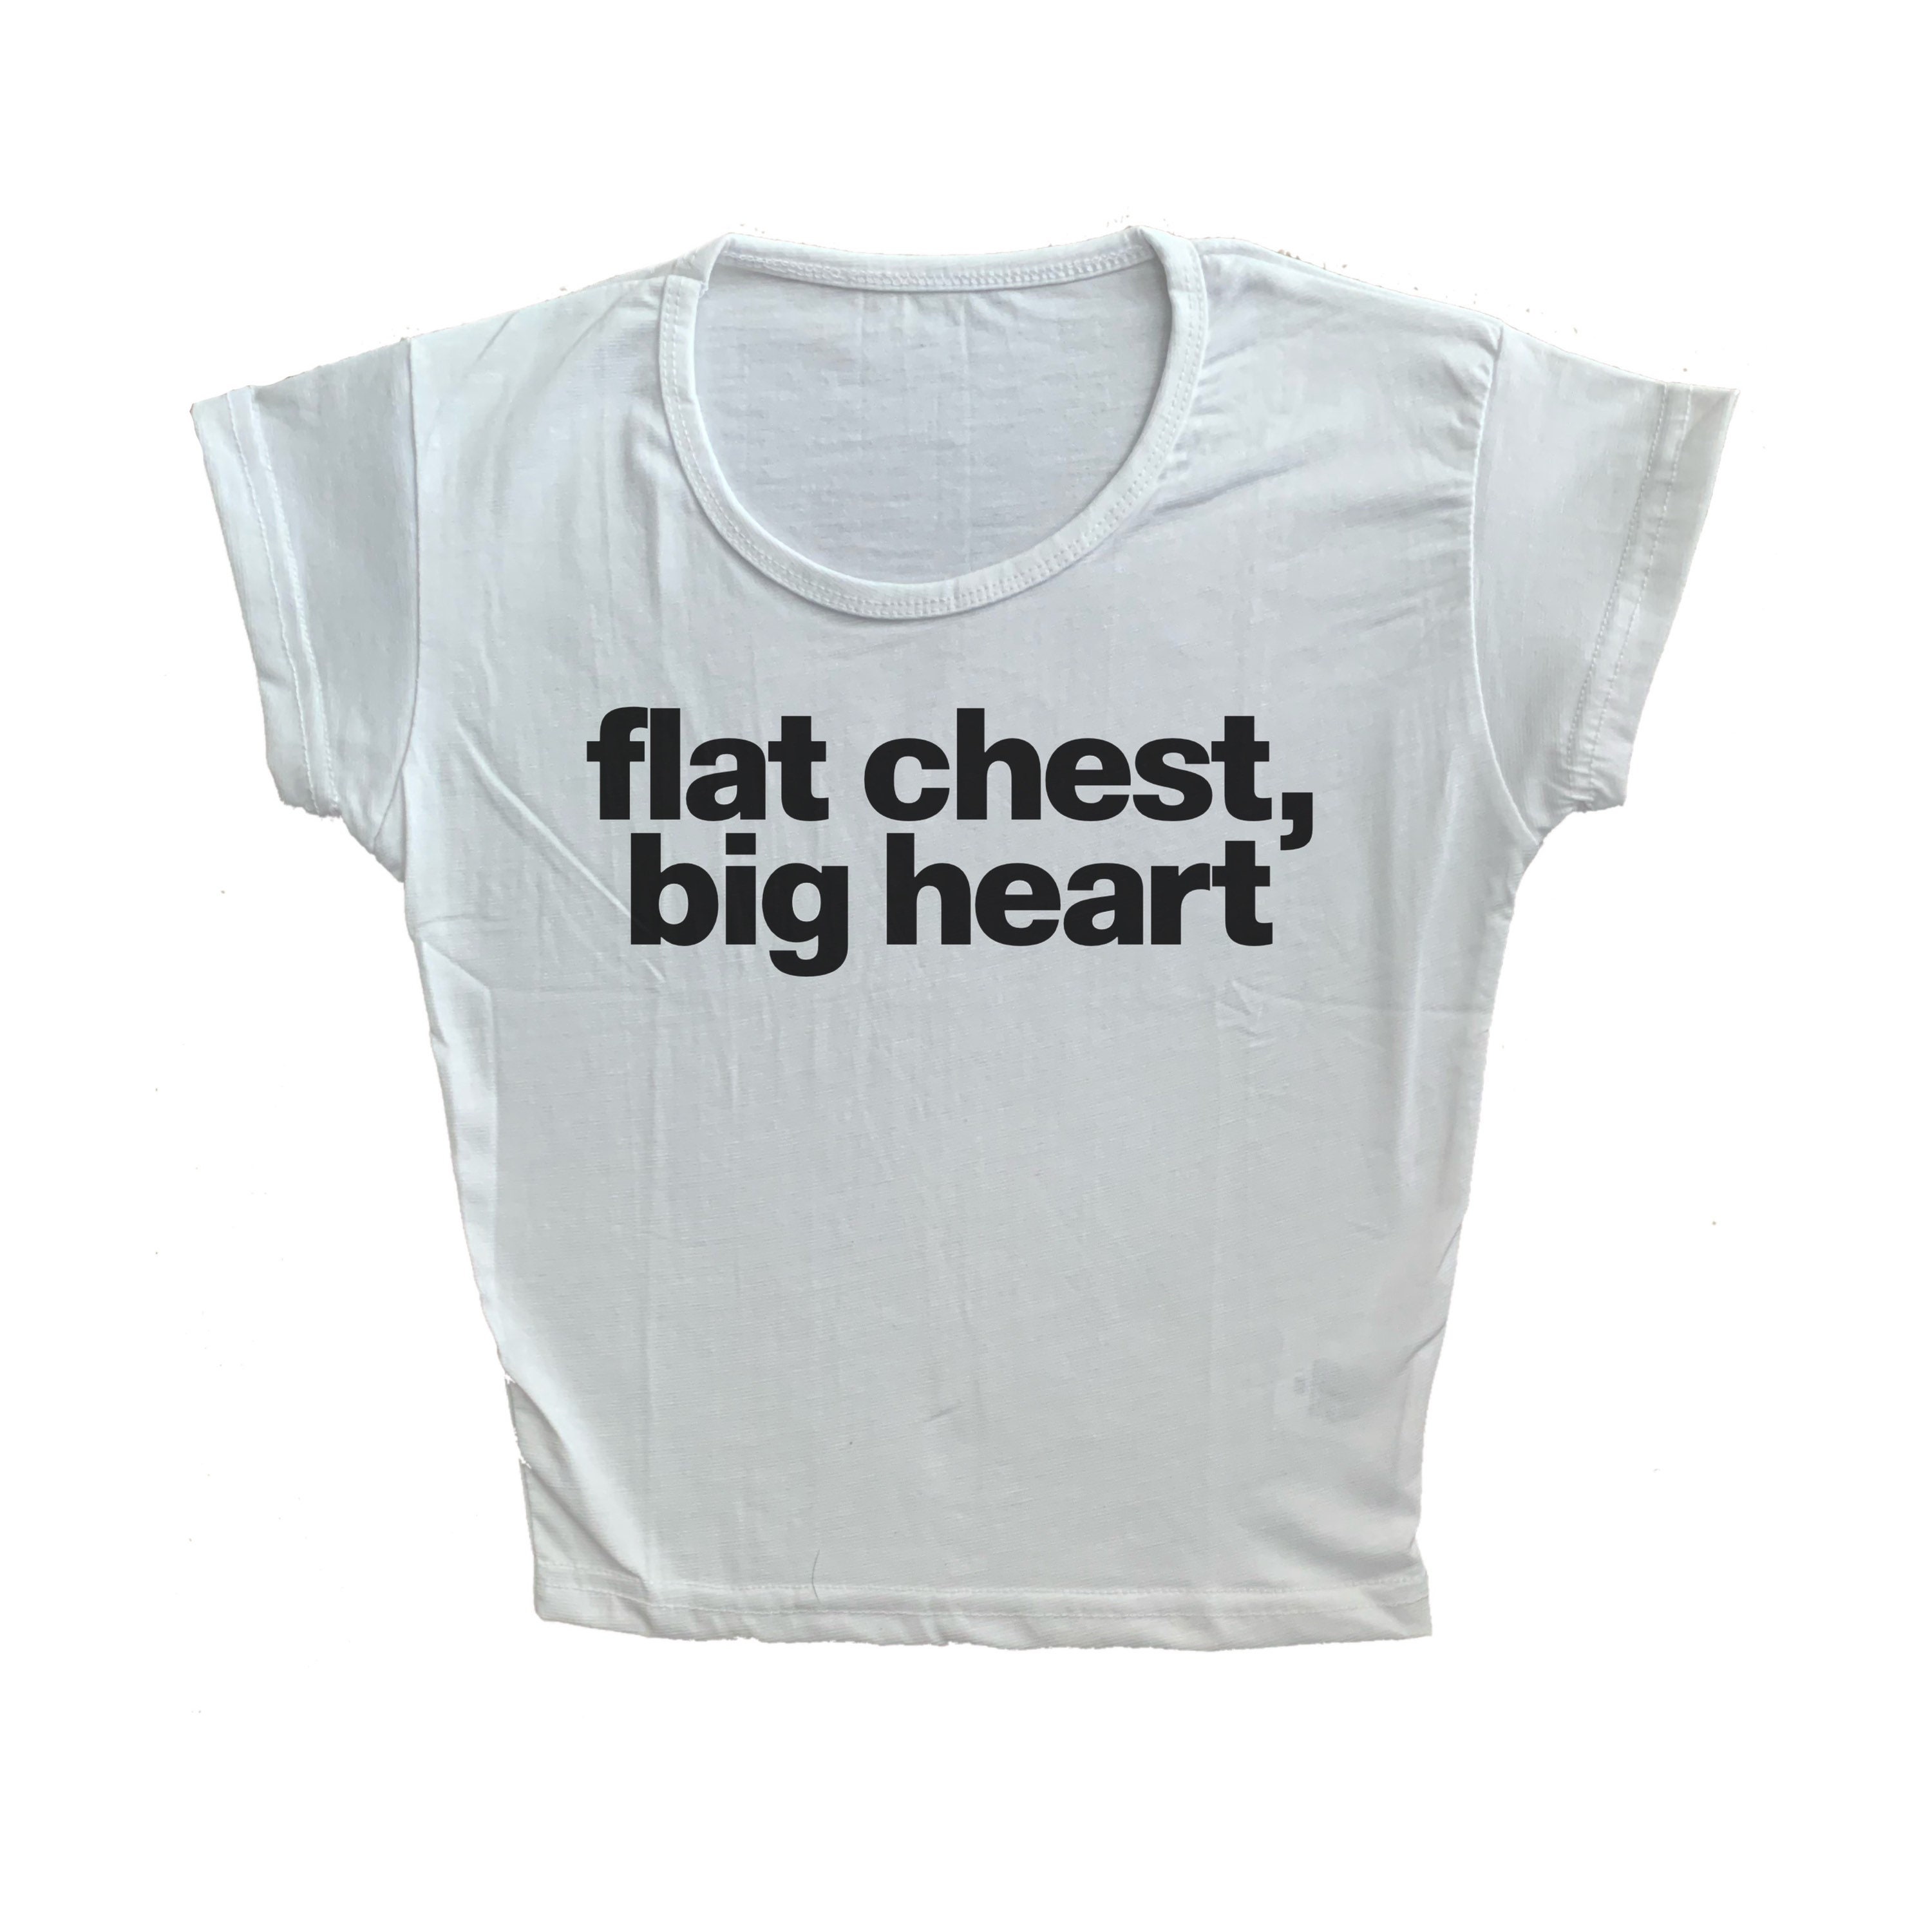 Flat Chest Big Heart Slogan Baby Tee Y2k Cropped Graphic T Shirt 2000s Era  Mall Goth Style Top -  Canada